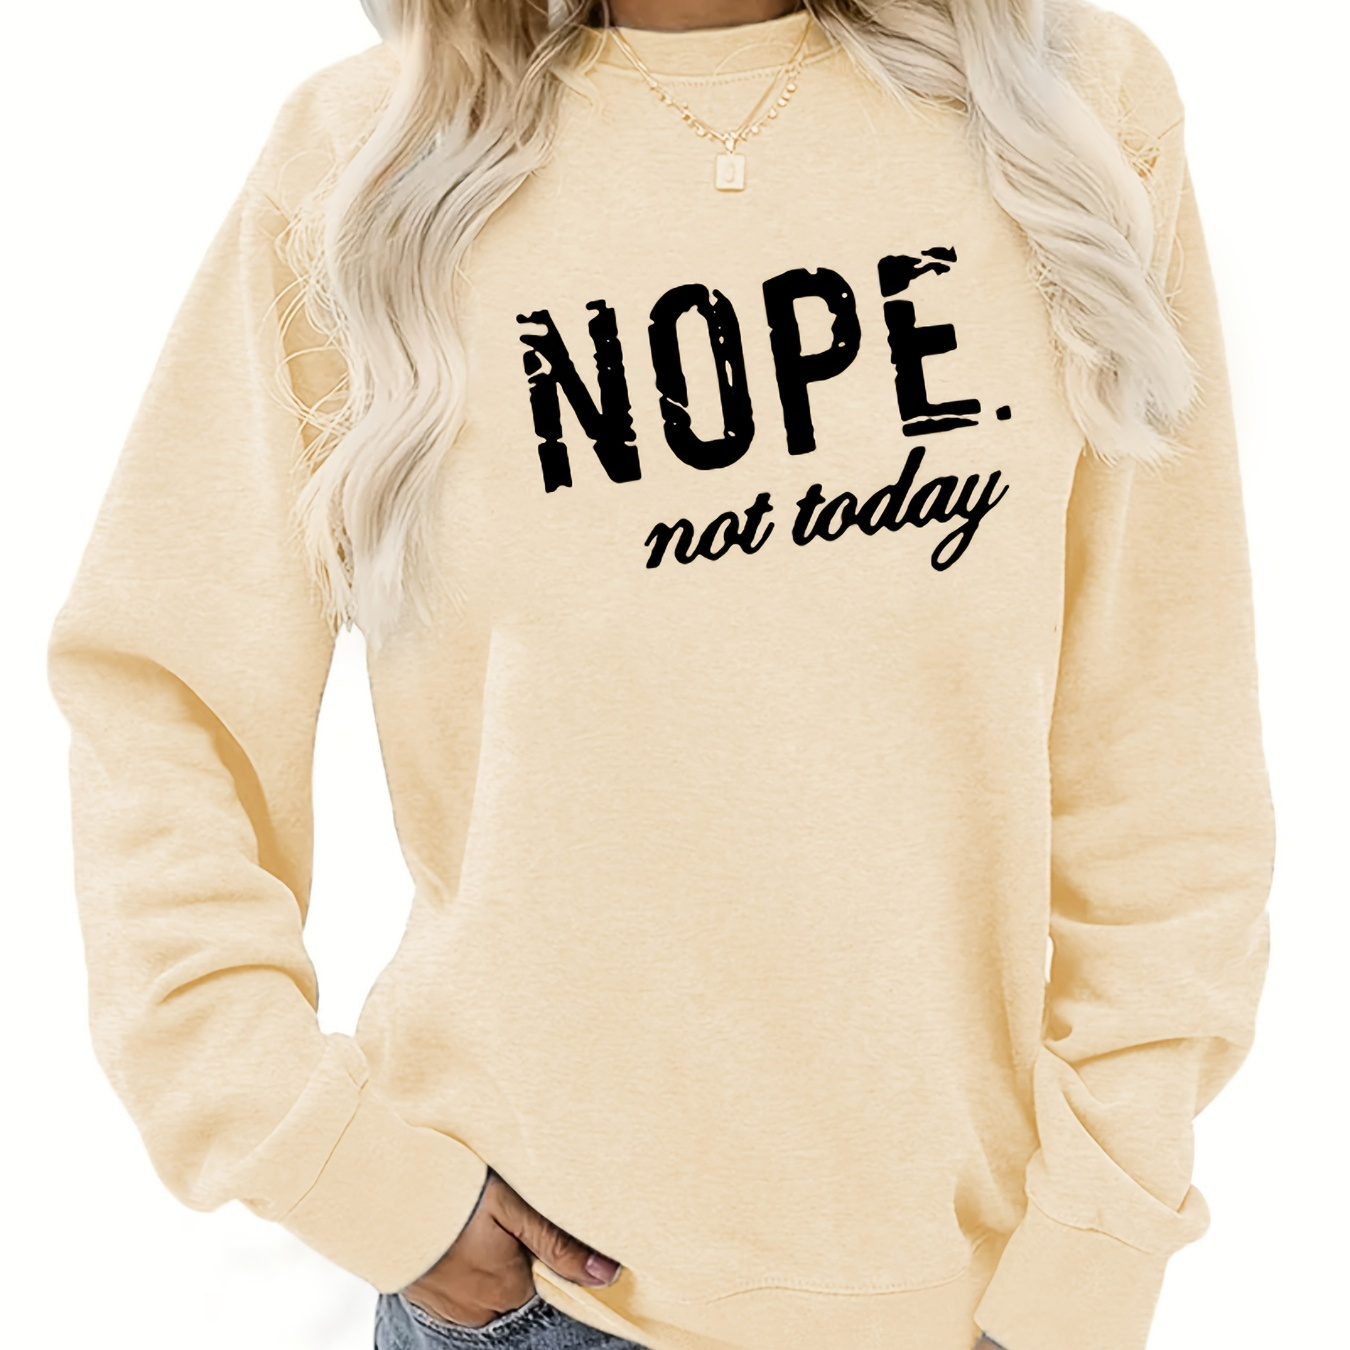 

Nope" Letter Graphic Sports Sweatshirts, Round Neck Long Sleeve Pullover Tops, Women's Sporty Sweatshirts